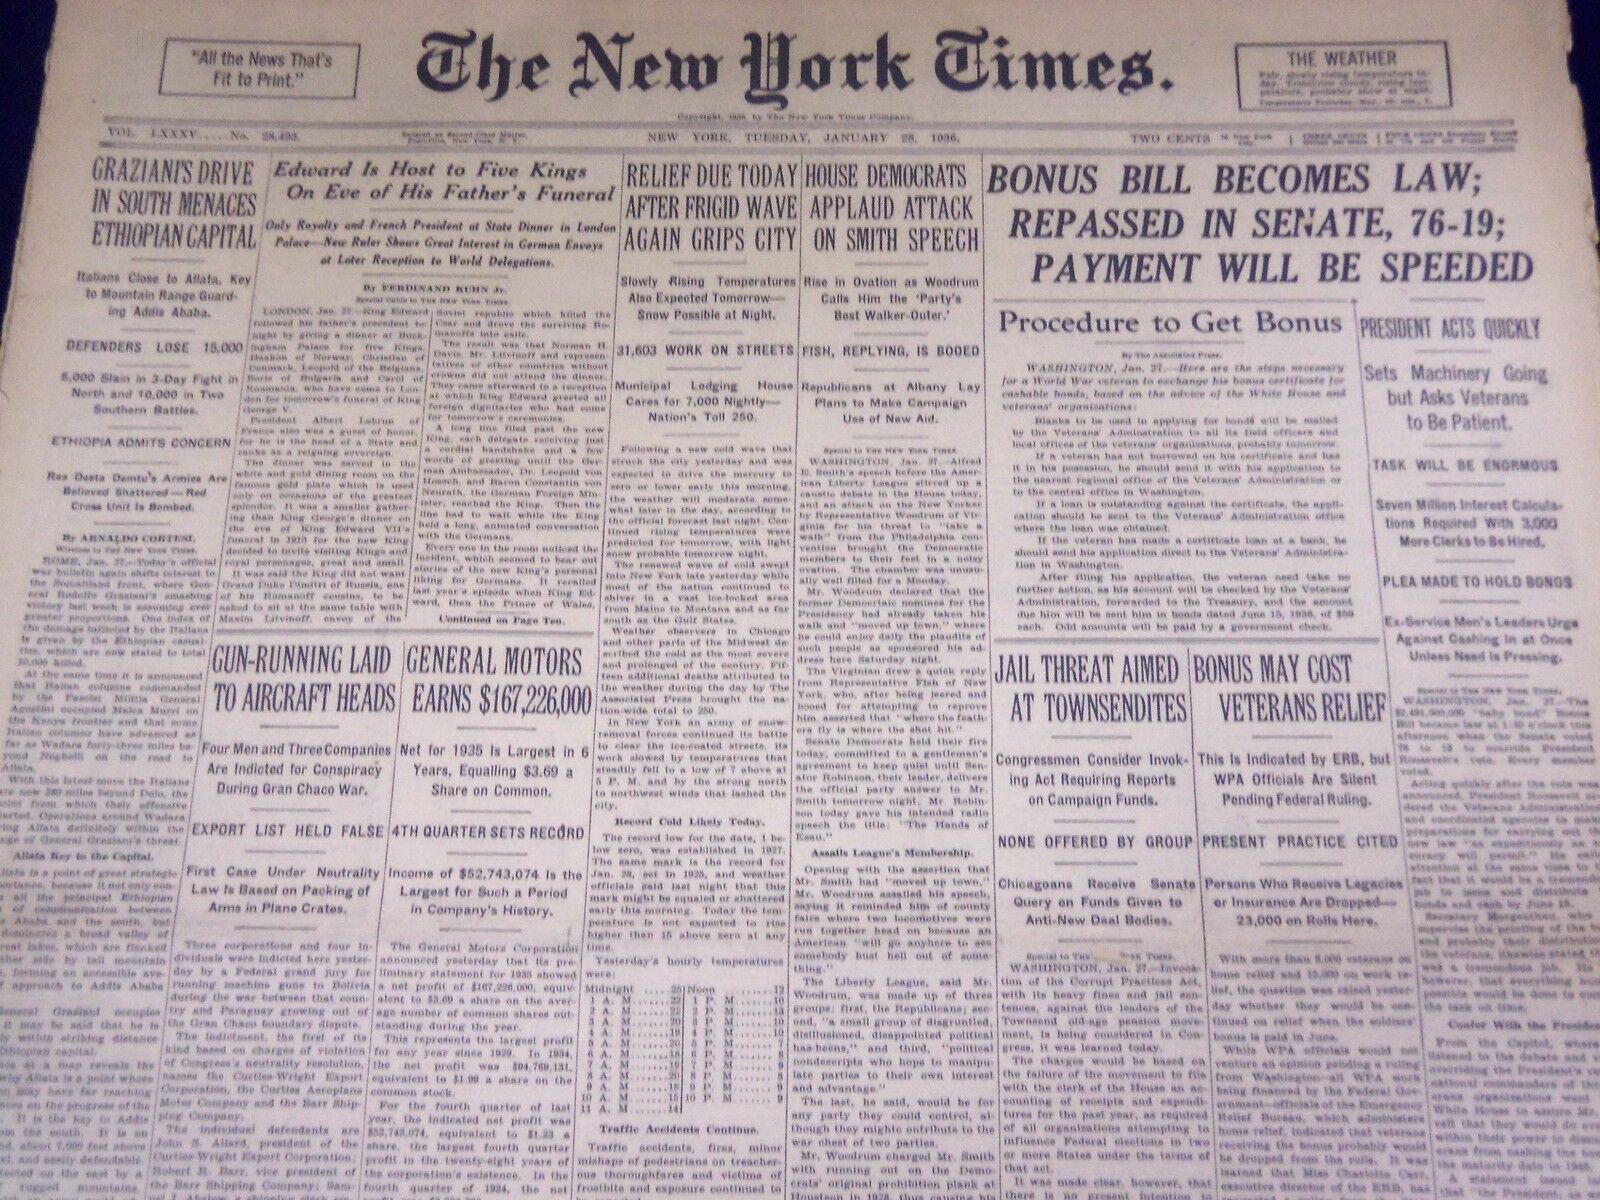 1936 JAN 28 NEW YORK TIMES - EDWARD IS HOST TO 5 KINGS EVE OF FUNERAL - NT 1854